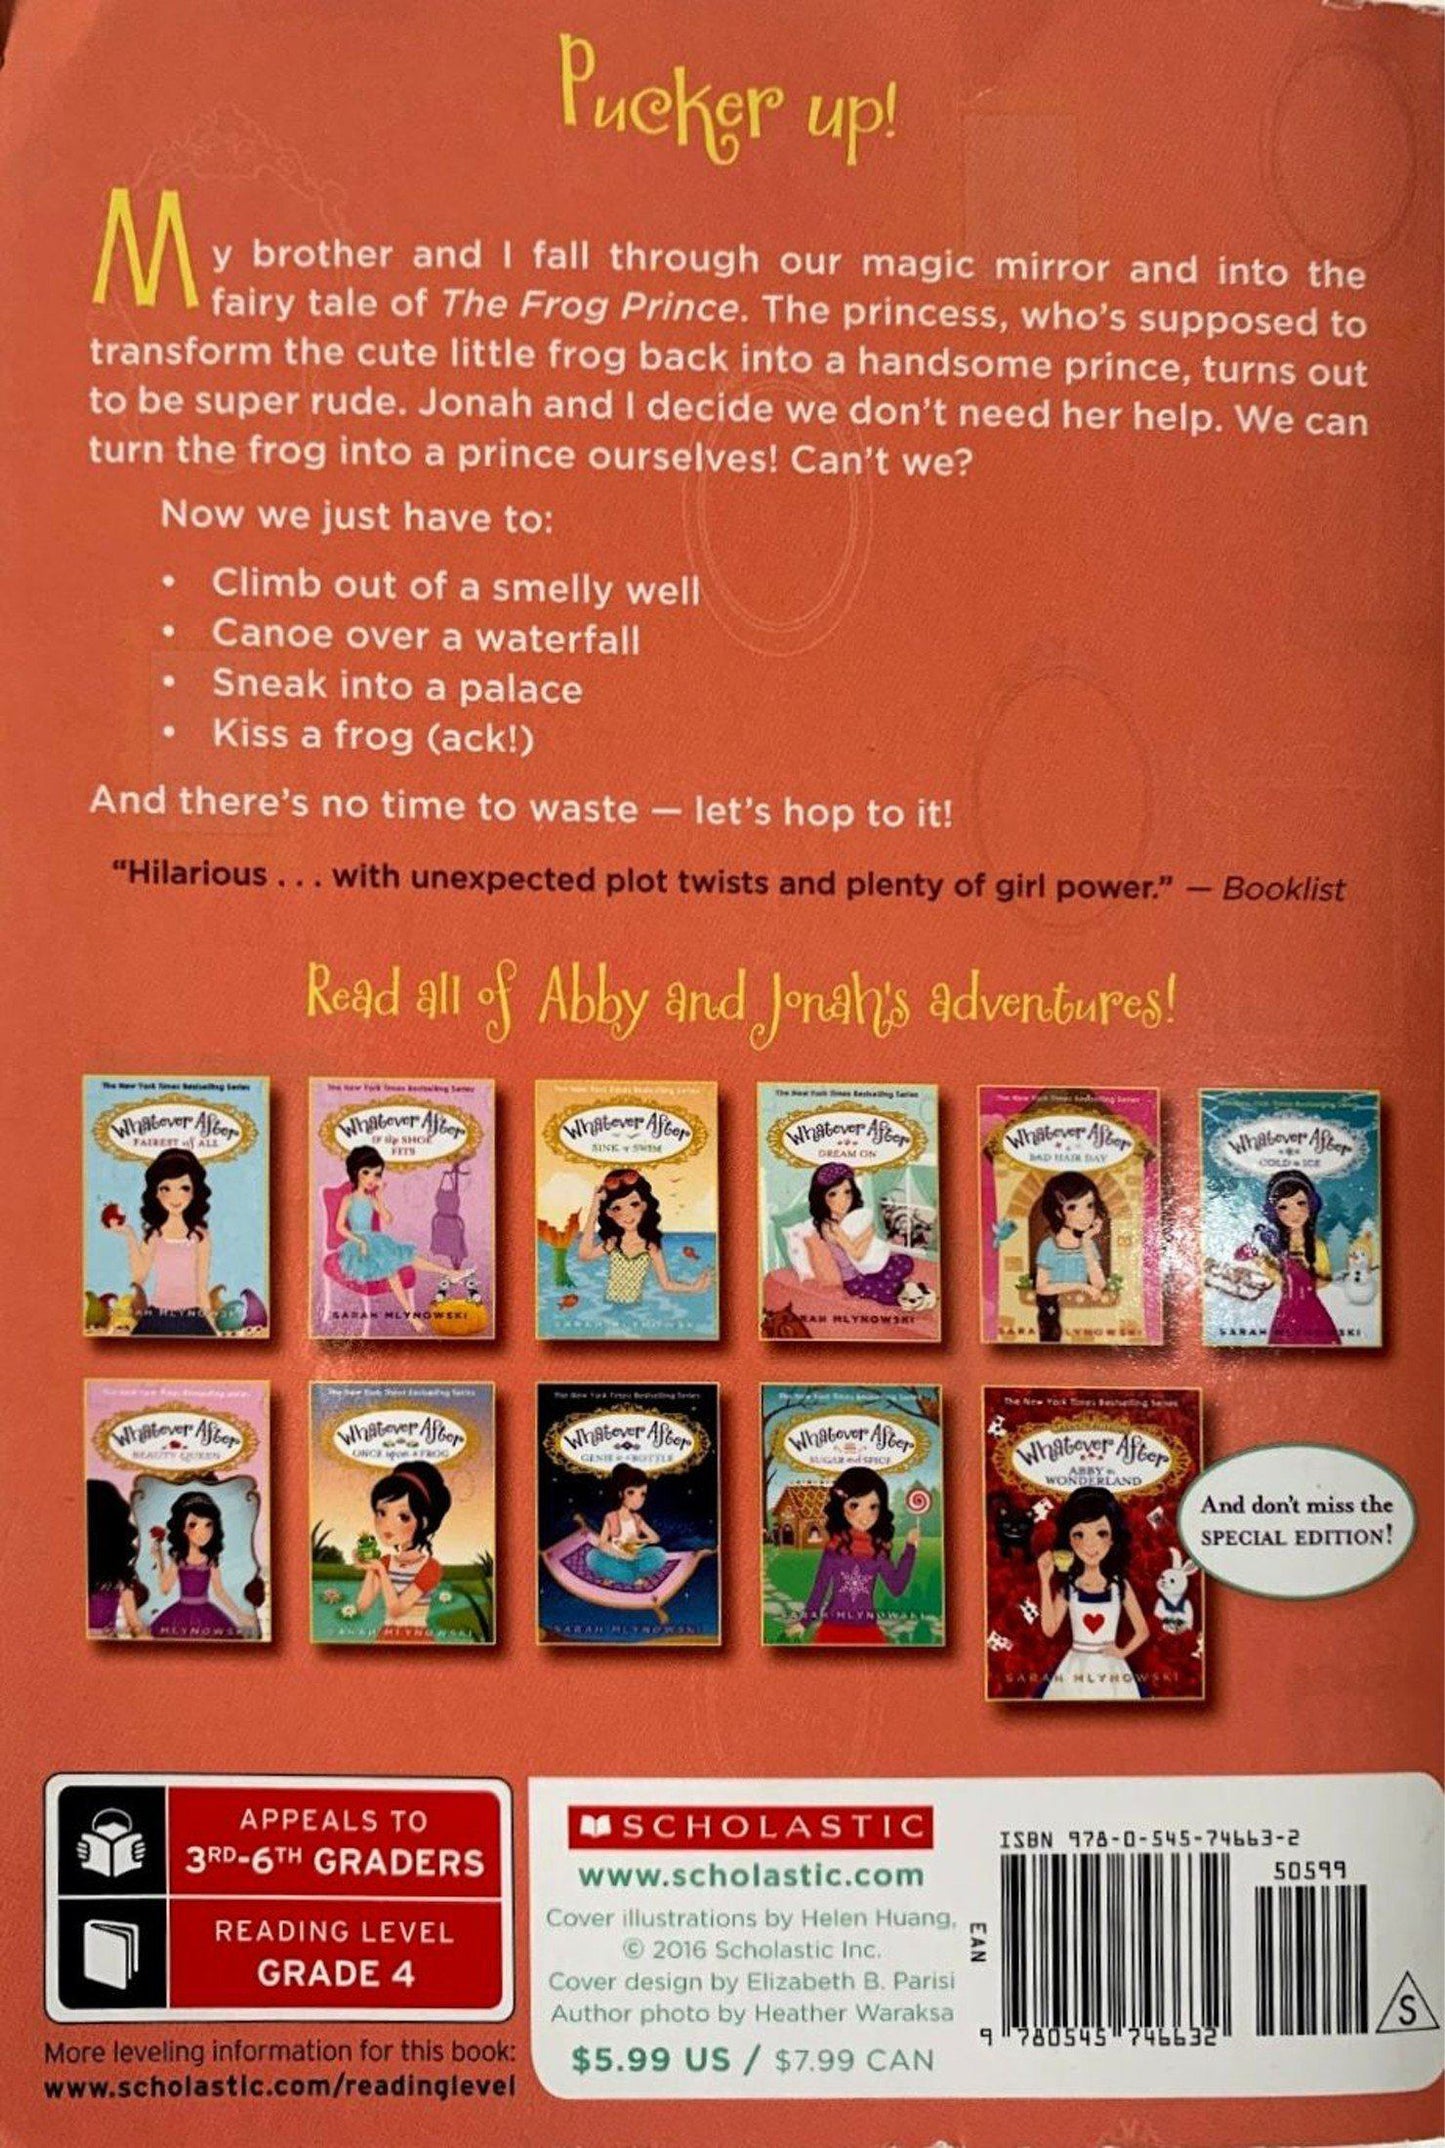 Whatever After : 2 Book Set Like New, 9-12 years Scholastic  (7050830151865)